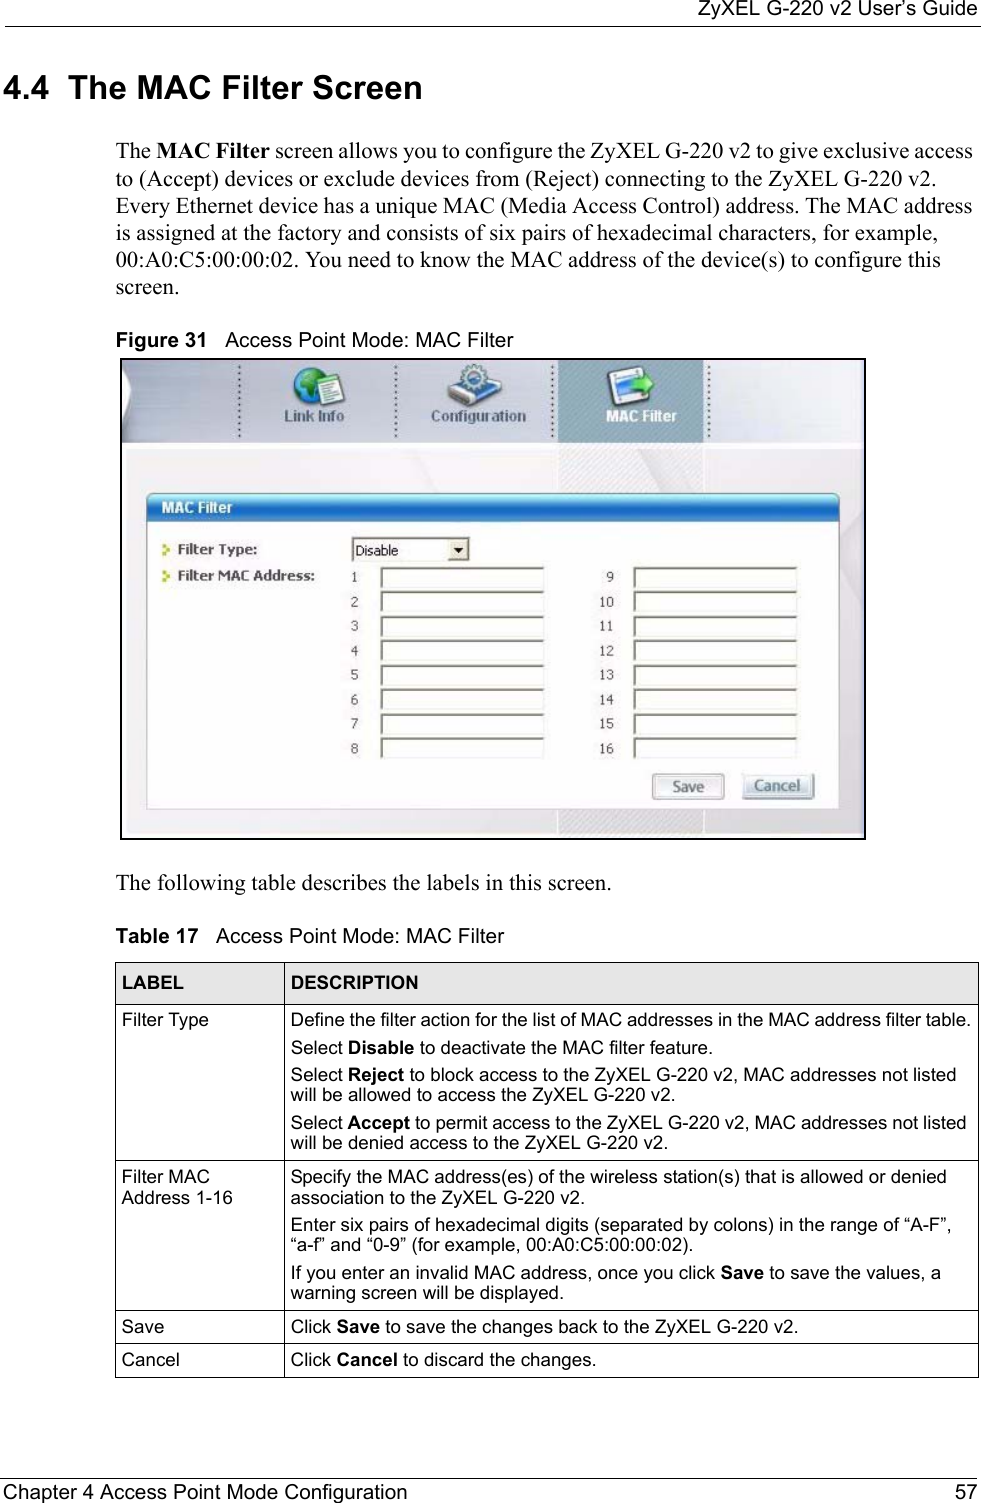 ZyXEL G-220 v2 User’s GuideChapter 4 Access Point Mode Configuration 574.4  The MAC Filter Screen The MAC Filter screen allows you to configure the ZyXEL G-220 v2 to give exclusive access to (Accept) devices or exclude devices from (Reject) connecting to the ZyXEL G-220 v2. Every Ethernet device has a unique MAC (Media Access Control) address. The MAC address is assigned at the factory and consists of six pairs of hexadecimal characters, for example, 00:A0:C5:00:00:02. You need to know the MAC address of the device(s) to configure this screen.Figure 31   Access Point Mode: MAC Filter The following table describes the labels in this screen. Table 17   Access Point Mode: MAC Filter LABEL DESCRIPTIONFilter Type  Define the filter action for the list of MAC addresses in the MAC address filter table.Select Disable to deactivate the MAC filter feature.Select Reject to block access to the ZyXEL G-220 v2, MAC addresses not listed will be allowed to access the ZyXEL G-220 v2.Select Accept to permit access to the ZyXEL G-220 v2, MAC addresses not listed will be denied access to the ZyXEL G-220 v2.Filter MAC Address 1-16Specify the MAC address(es) of the wireless station(s) that is allowed or denied association to the ZyXEL G-220 v2.Enter six pairs of hexadecimal digits (separated by colons) in the range of “A-F”, “a-f” and “0-9” (for example, 00:A0:C5:00:00:02).If you enter an invalid MAC address, once you click Save to save the values, a warning screen will be displayed.Save Click Save to save the changes back to the ZyXEL G-220 v2.Cancel Click Cancel to discard the changes.